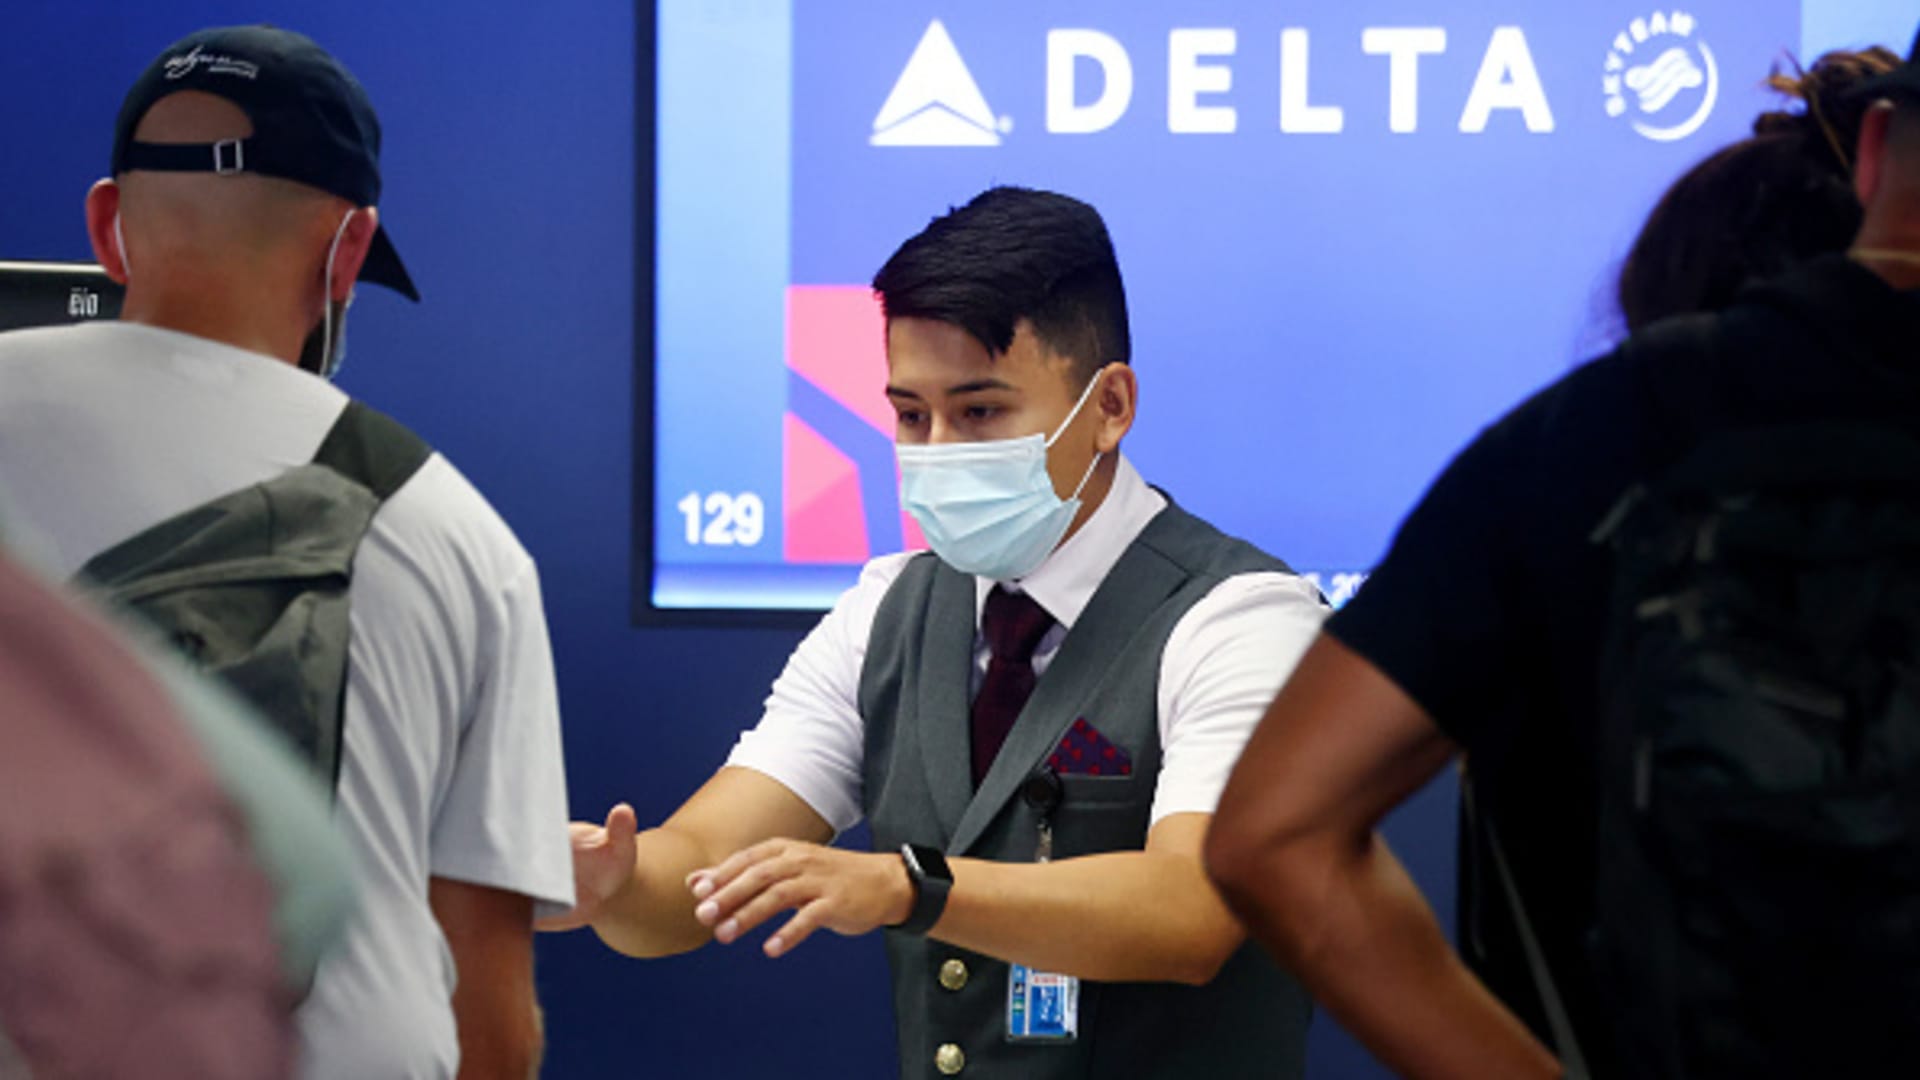 A Delta Air Lines employee works on the departures level at Los Angeles International Airport (LAX) on August 25, 2021 in Los Angeles, California.